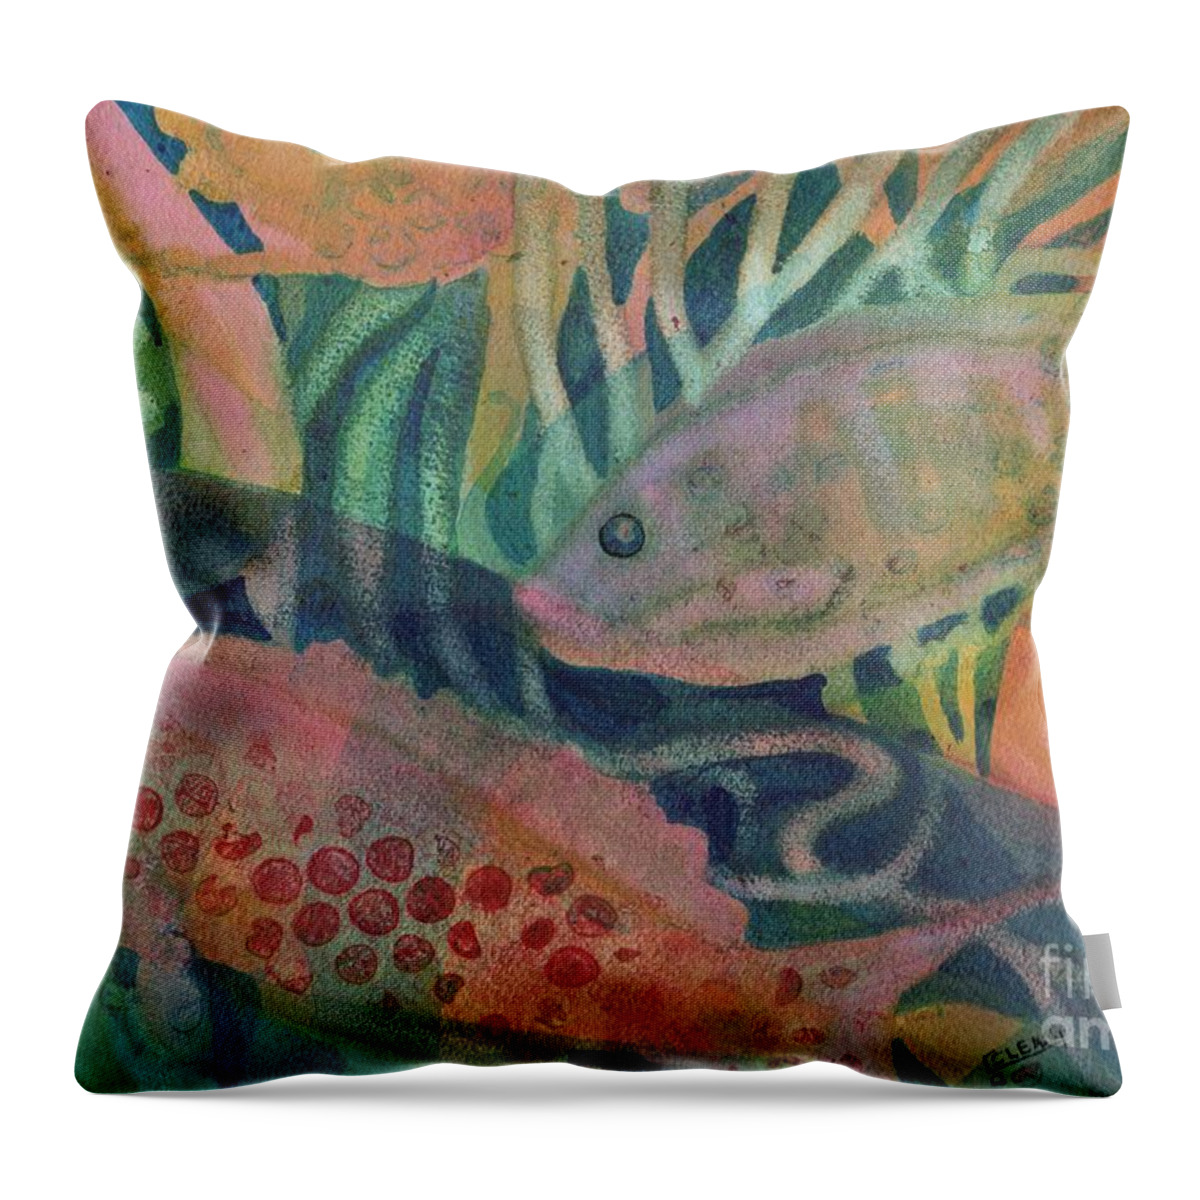 Underwater Throw Pillow featuring the painting One Two Pink Blue by Joan Clear